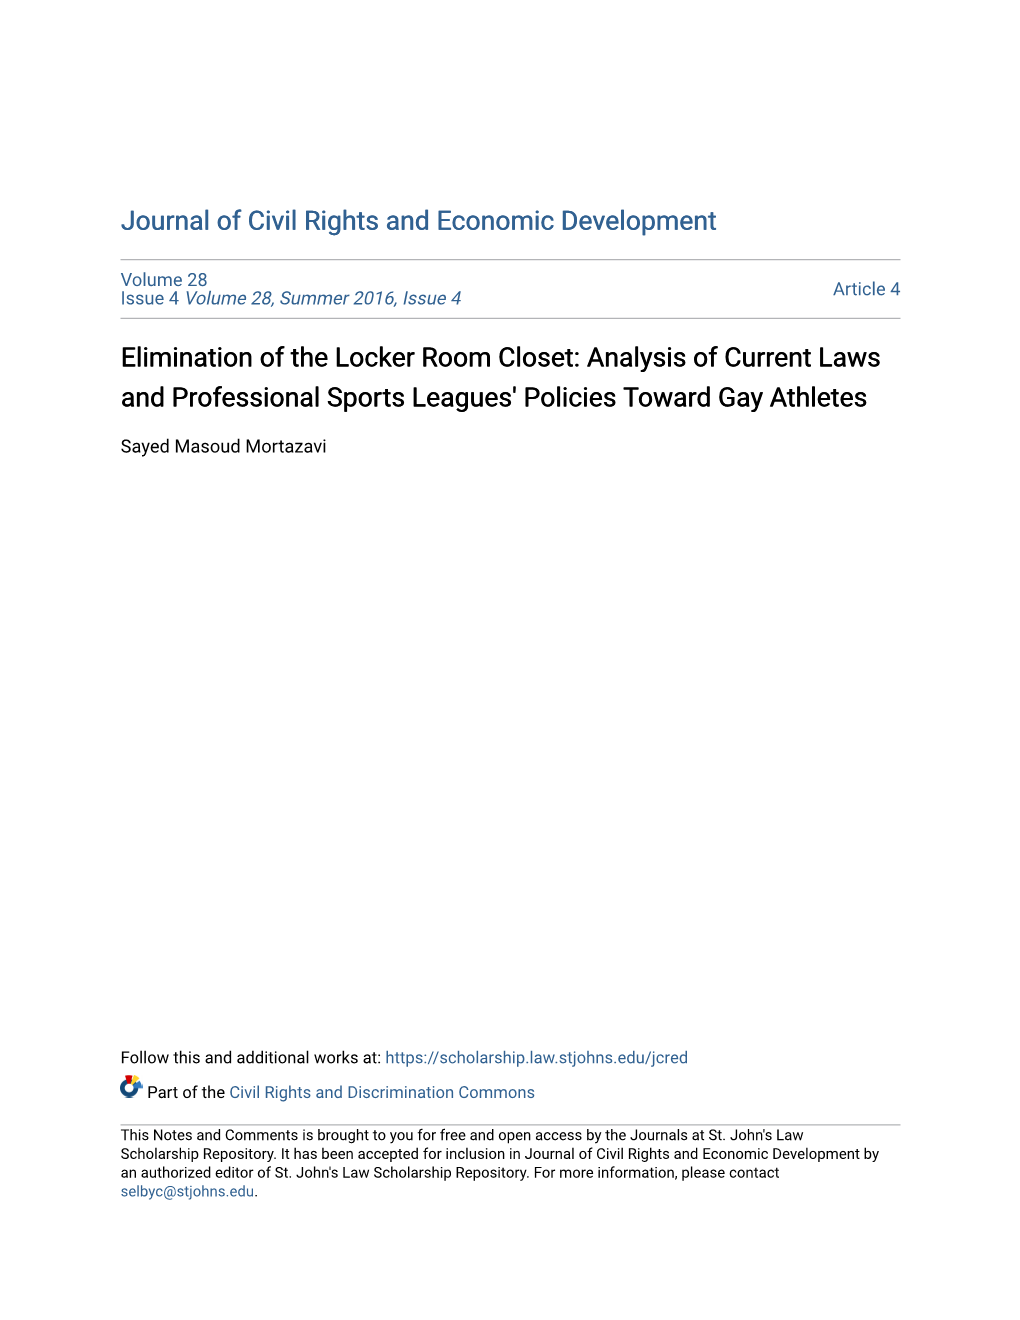 Elimination of the Locker Room Closet: Analysis of Current Laws and Professional Sports Leagues' Policies Toward Gay Athletes